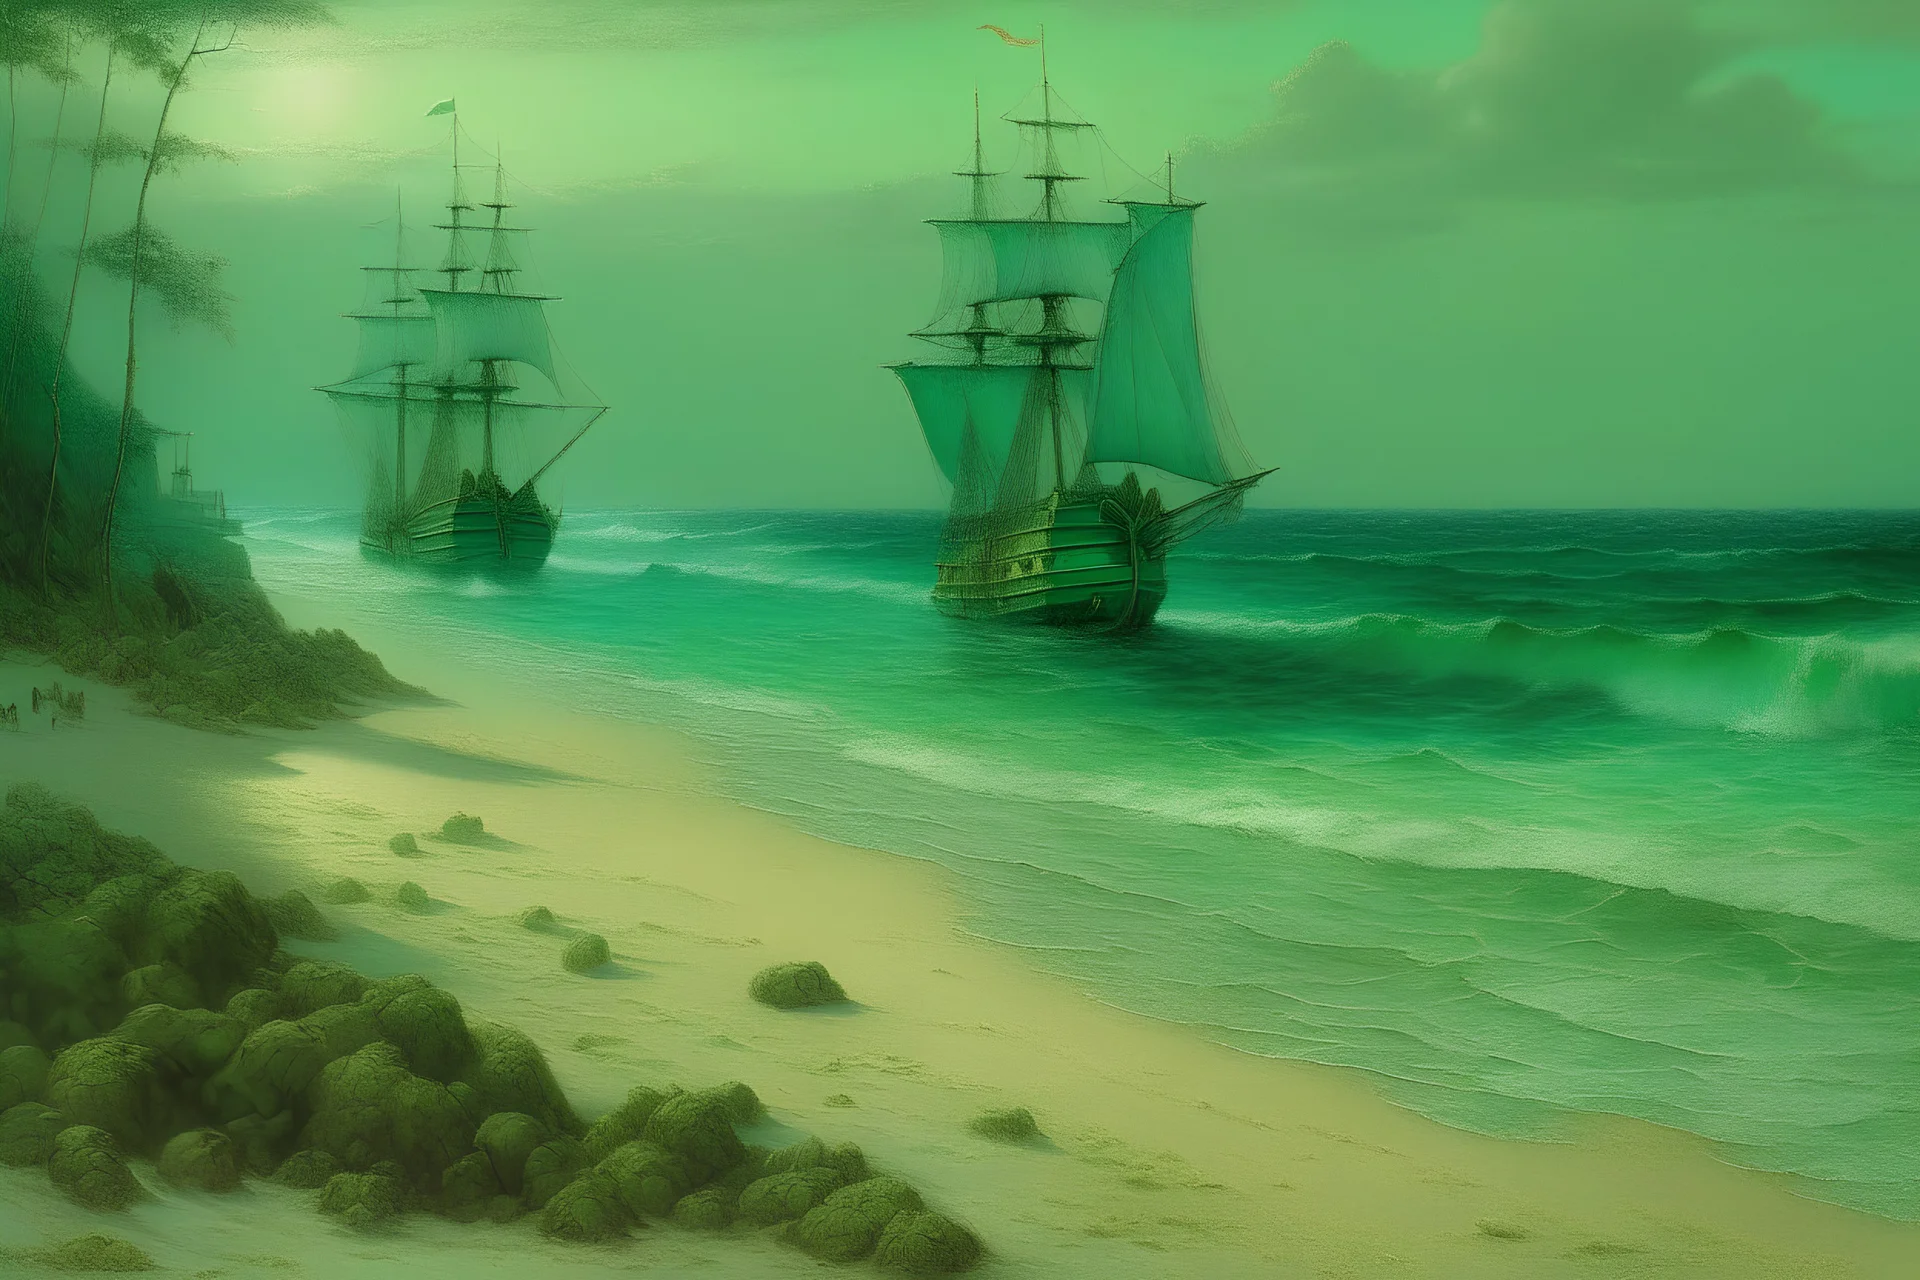 A bluish green beach with a pirate ship painted by John Atkinson Grimshaw